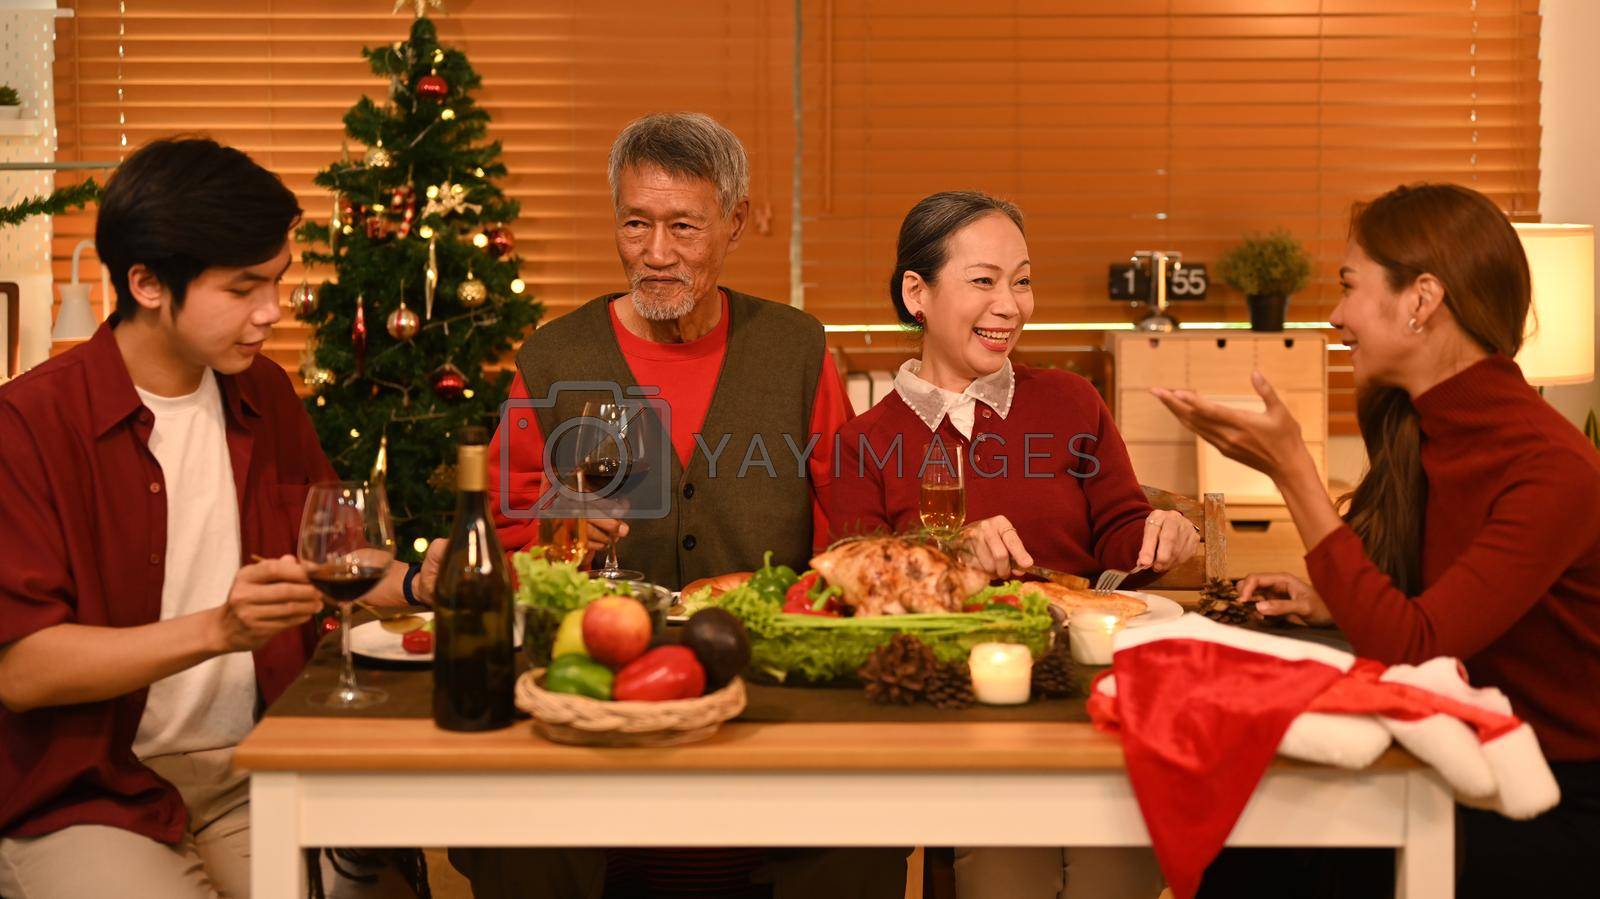 Royalty free image of Group of people enjoying Thanksgiving meal in comfortable home. Celebration, holidays and Christmas concept by prathanchorruangsak